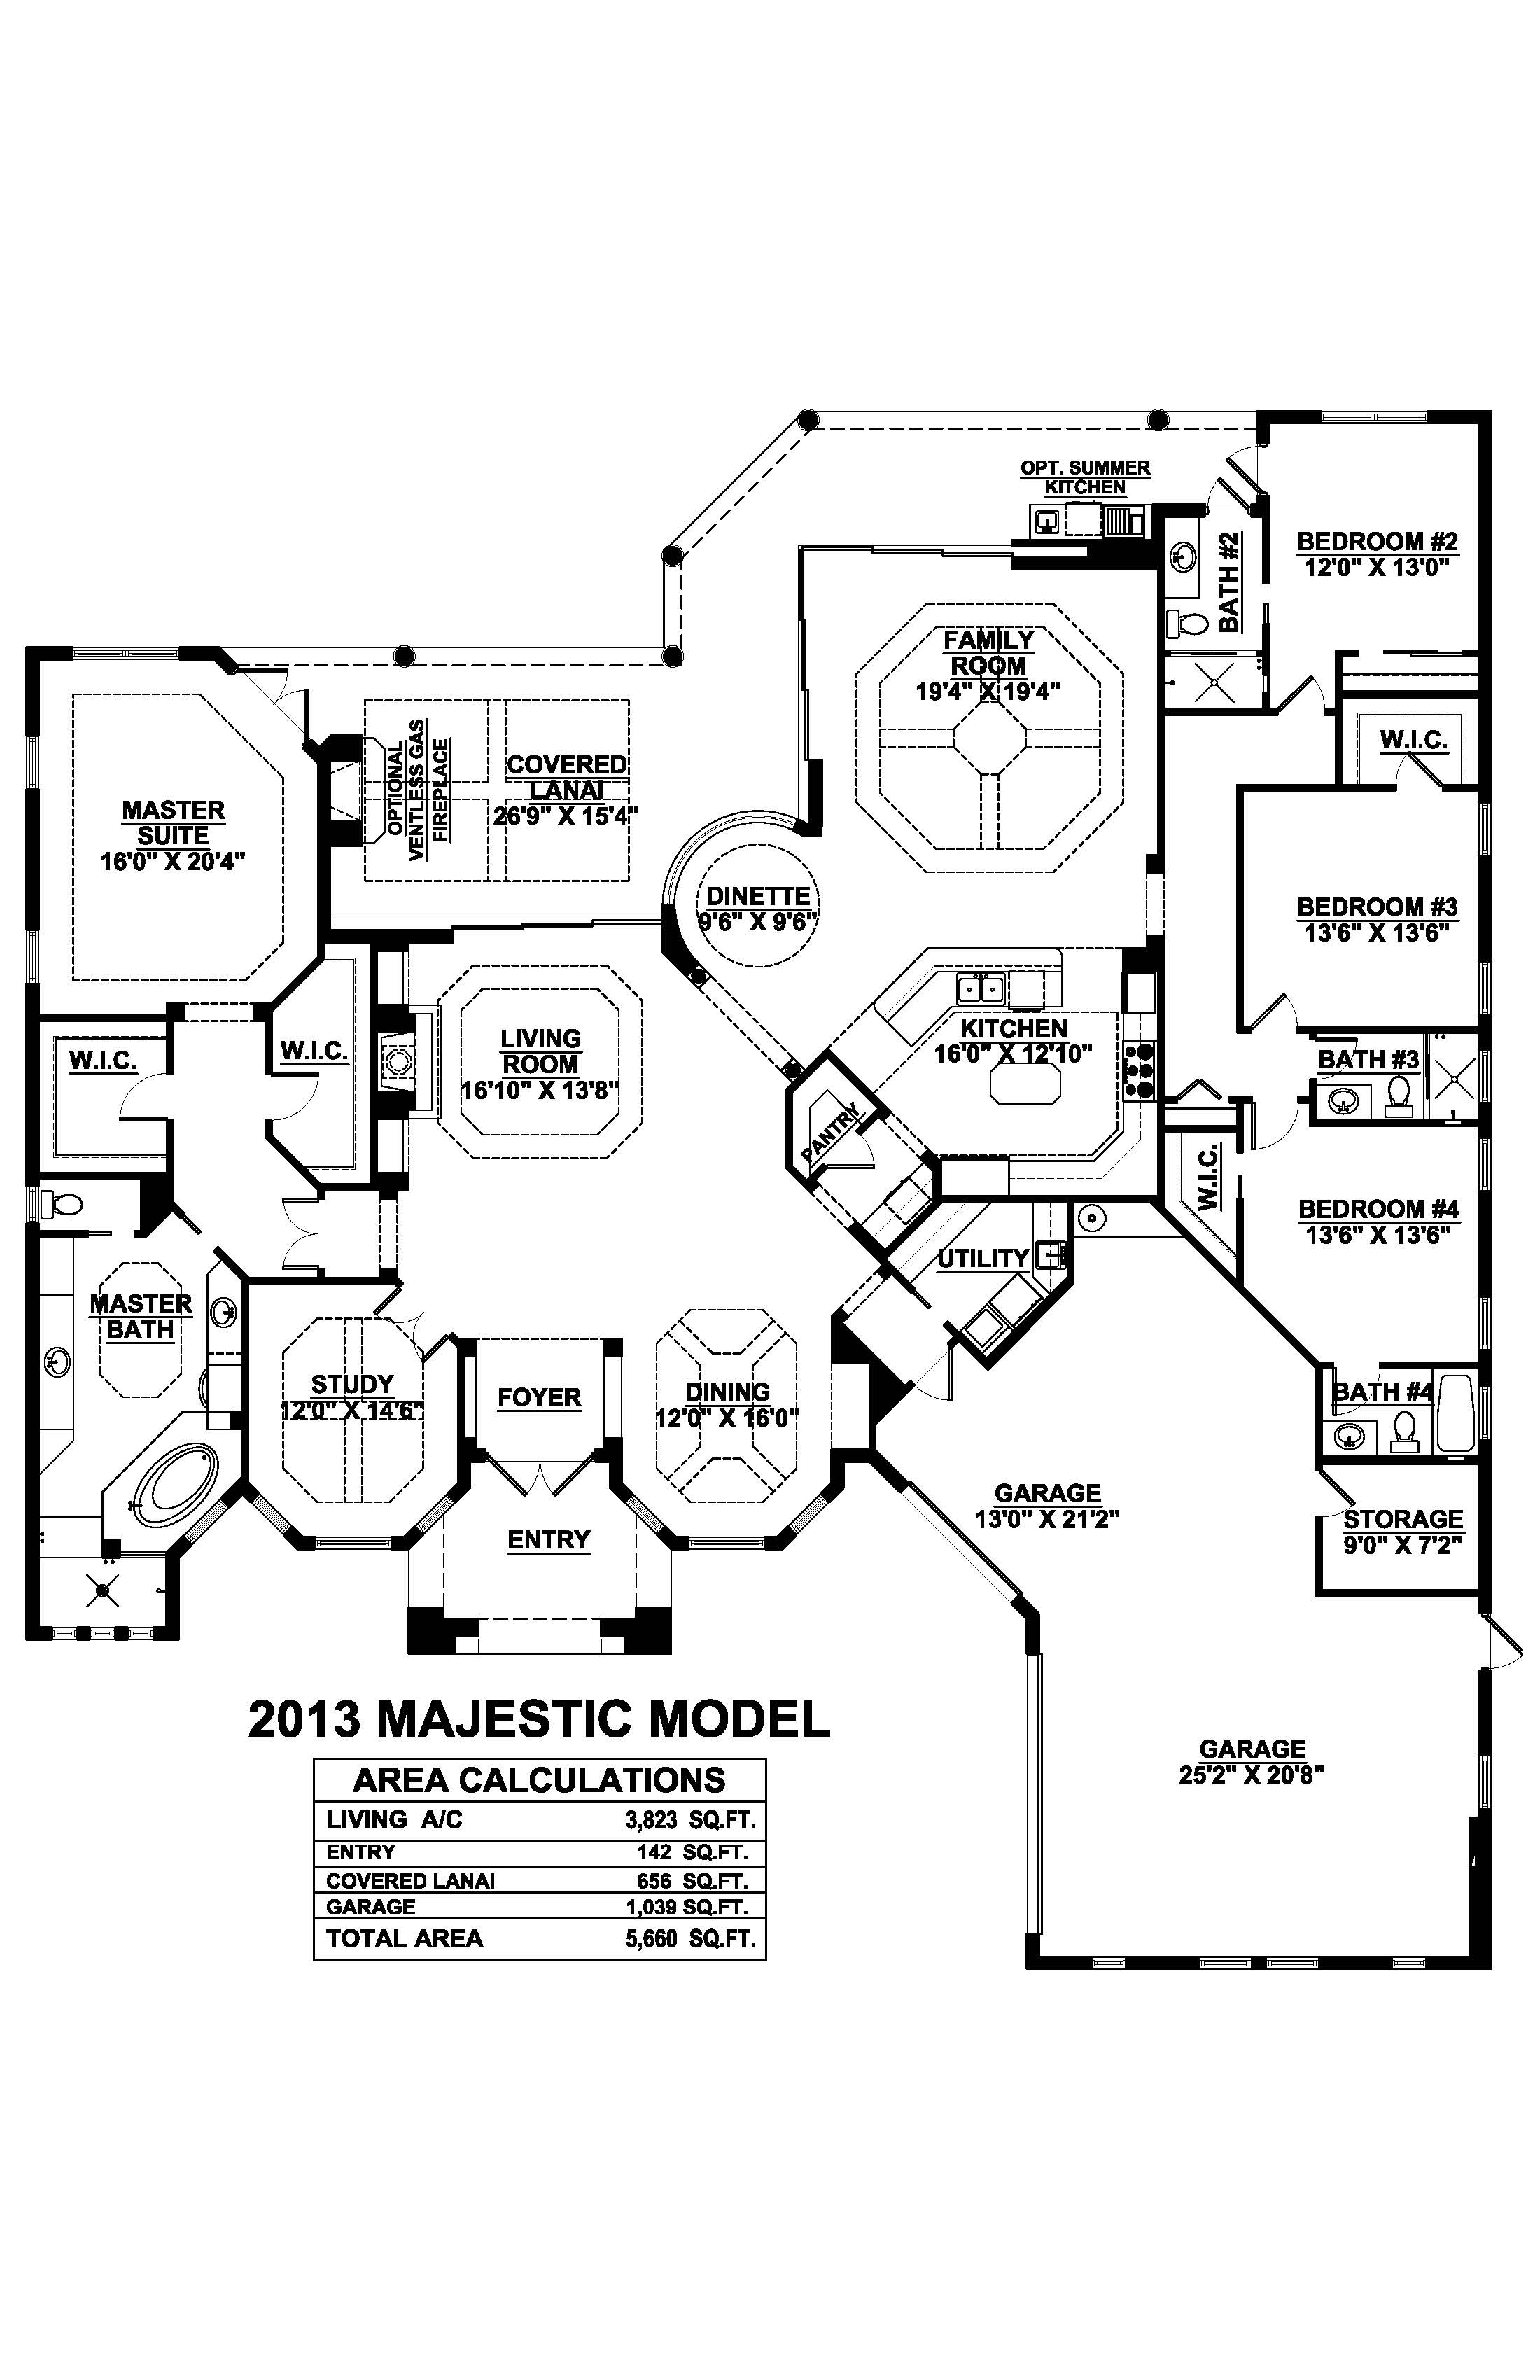 Majestic Floor Plan in Lakoya, Stock Construction, 4 bedroom, 4 bath, living room, family room, dining room, dinette, study, screened covered lanai, outdoor living, 3-car garage with A/C storage area